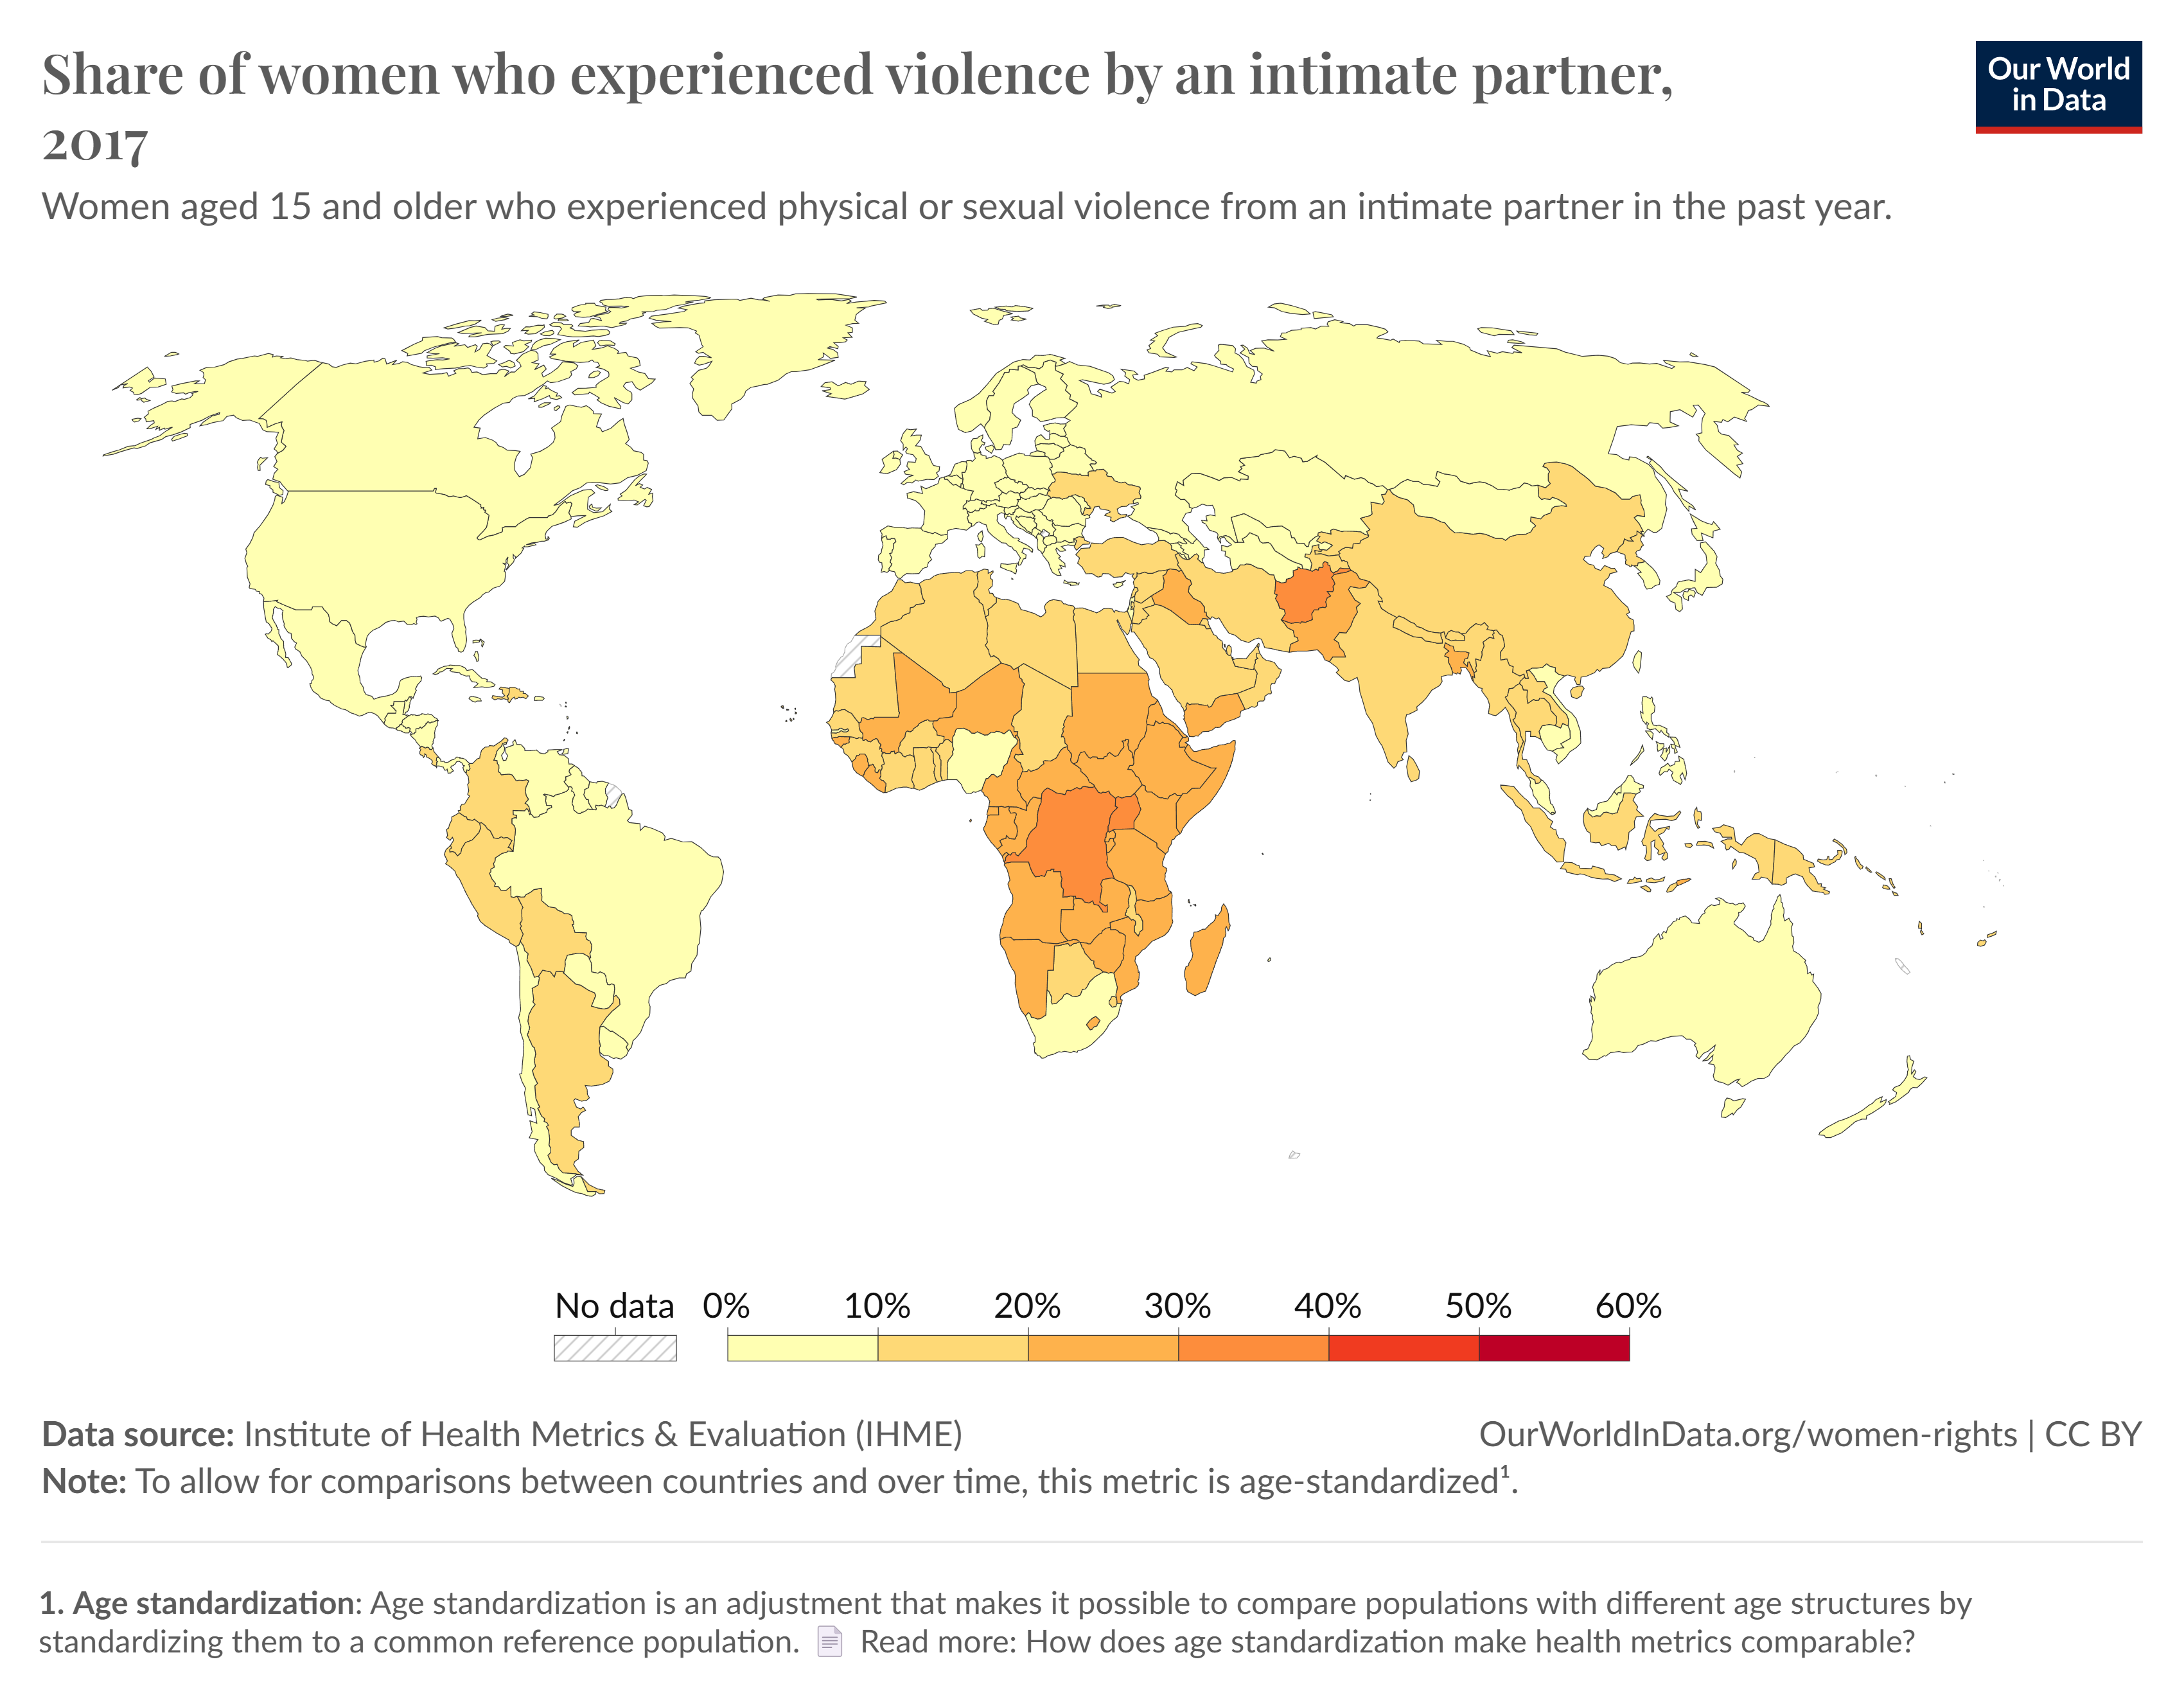 share-of-women-who-experienced-violence-by-an-intimate-partner.png